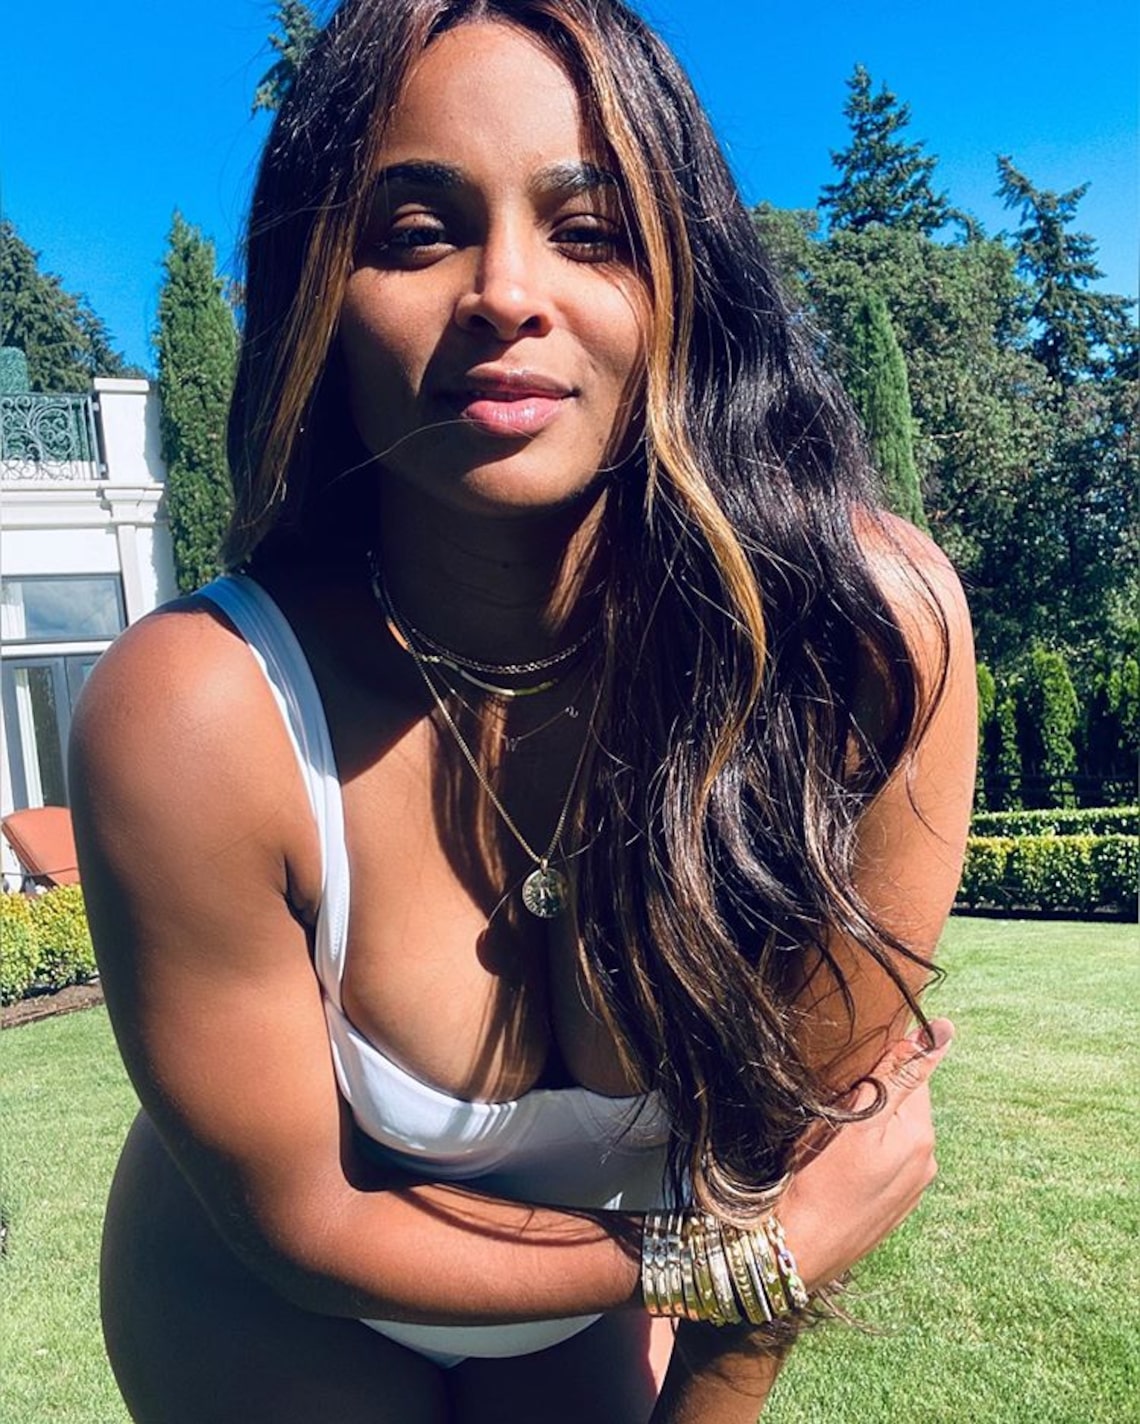 Ciara New WW Ambassador: Singer's Baby Goal to Lose 48lbs and Inspire Lifestyle Changes